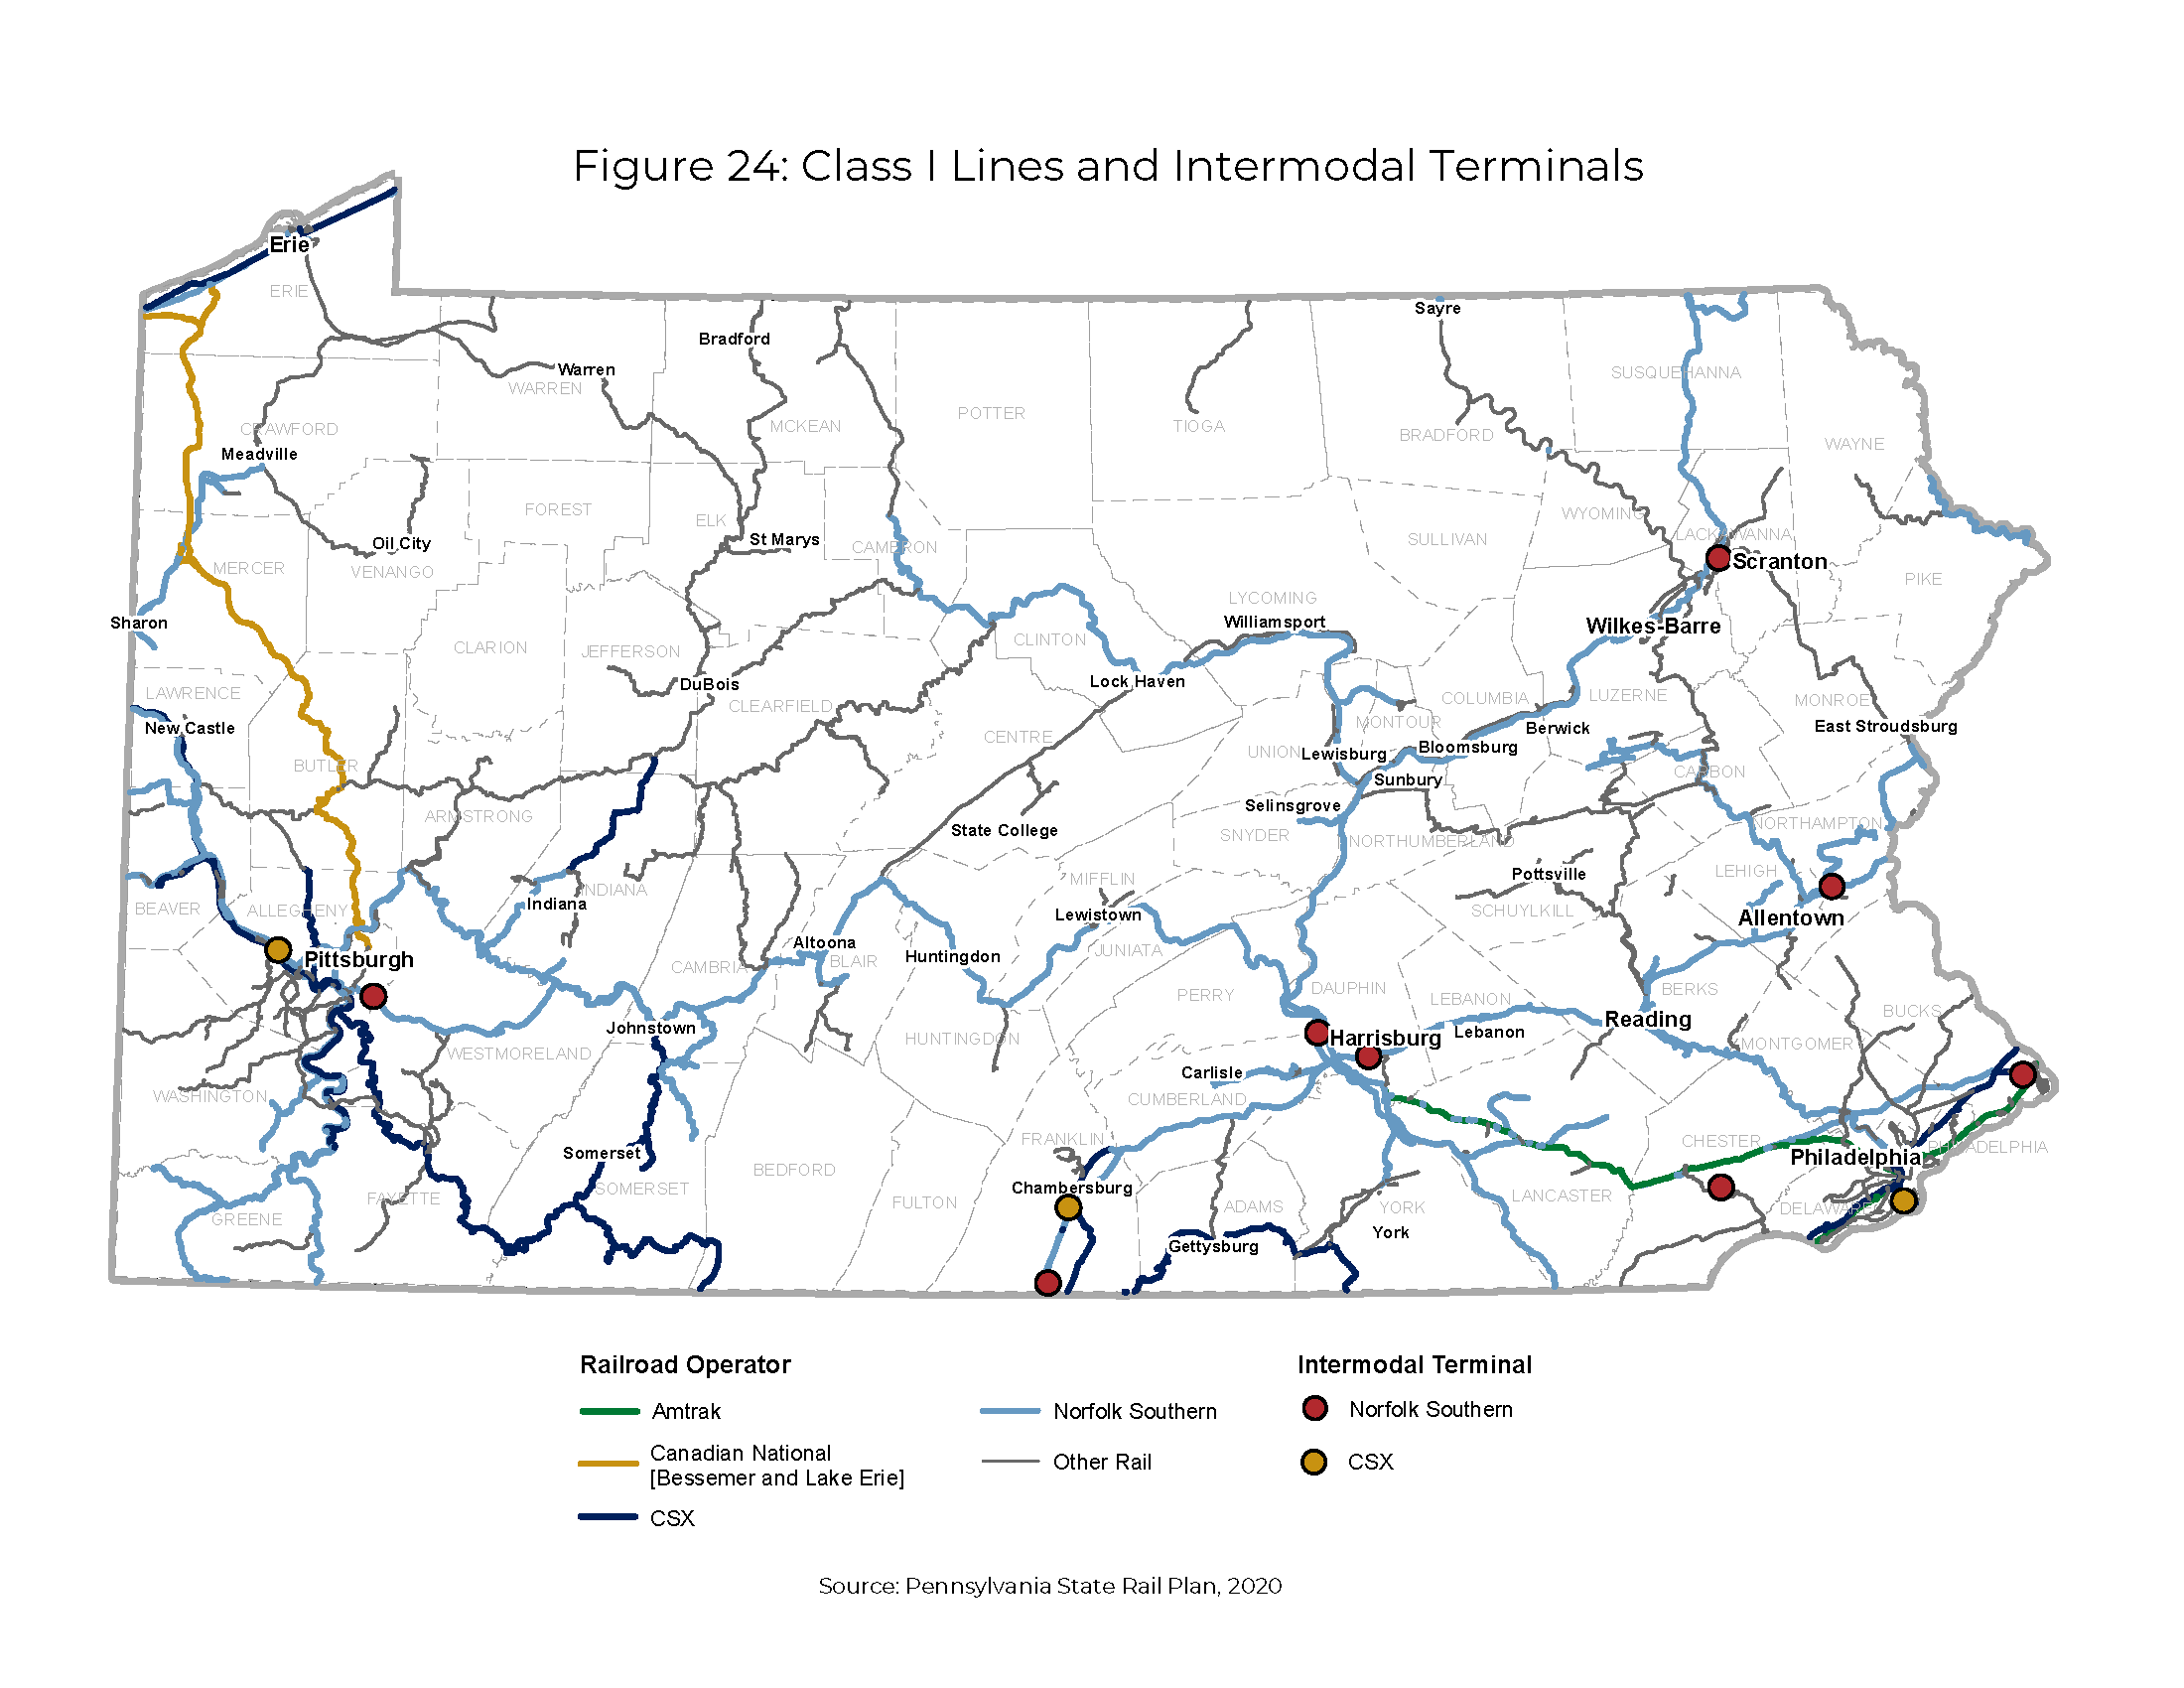 Figure 24 is the 2020 Pennsylvania State Rail Plan state map illustrating the Class 1 lines of railroad operators Amtrak, Canadian National (Bessemer and Lake Erie), CSX, Norfolk Southern, and other rails, as well as the Intermodal terminals of Norfolk Southern and CSX.